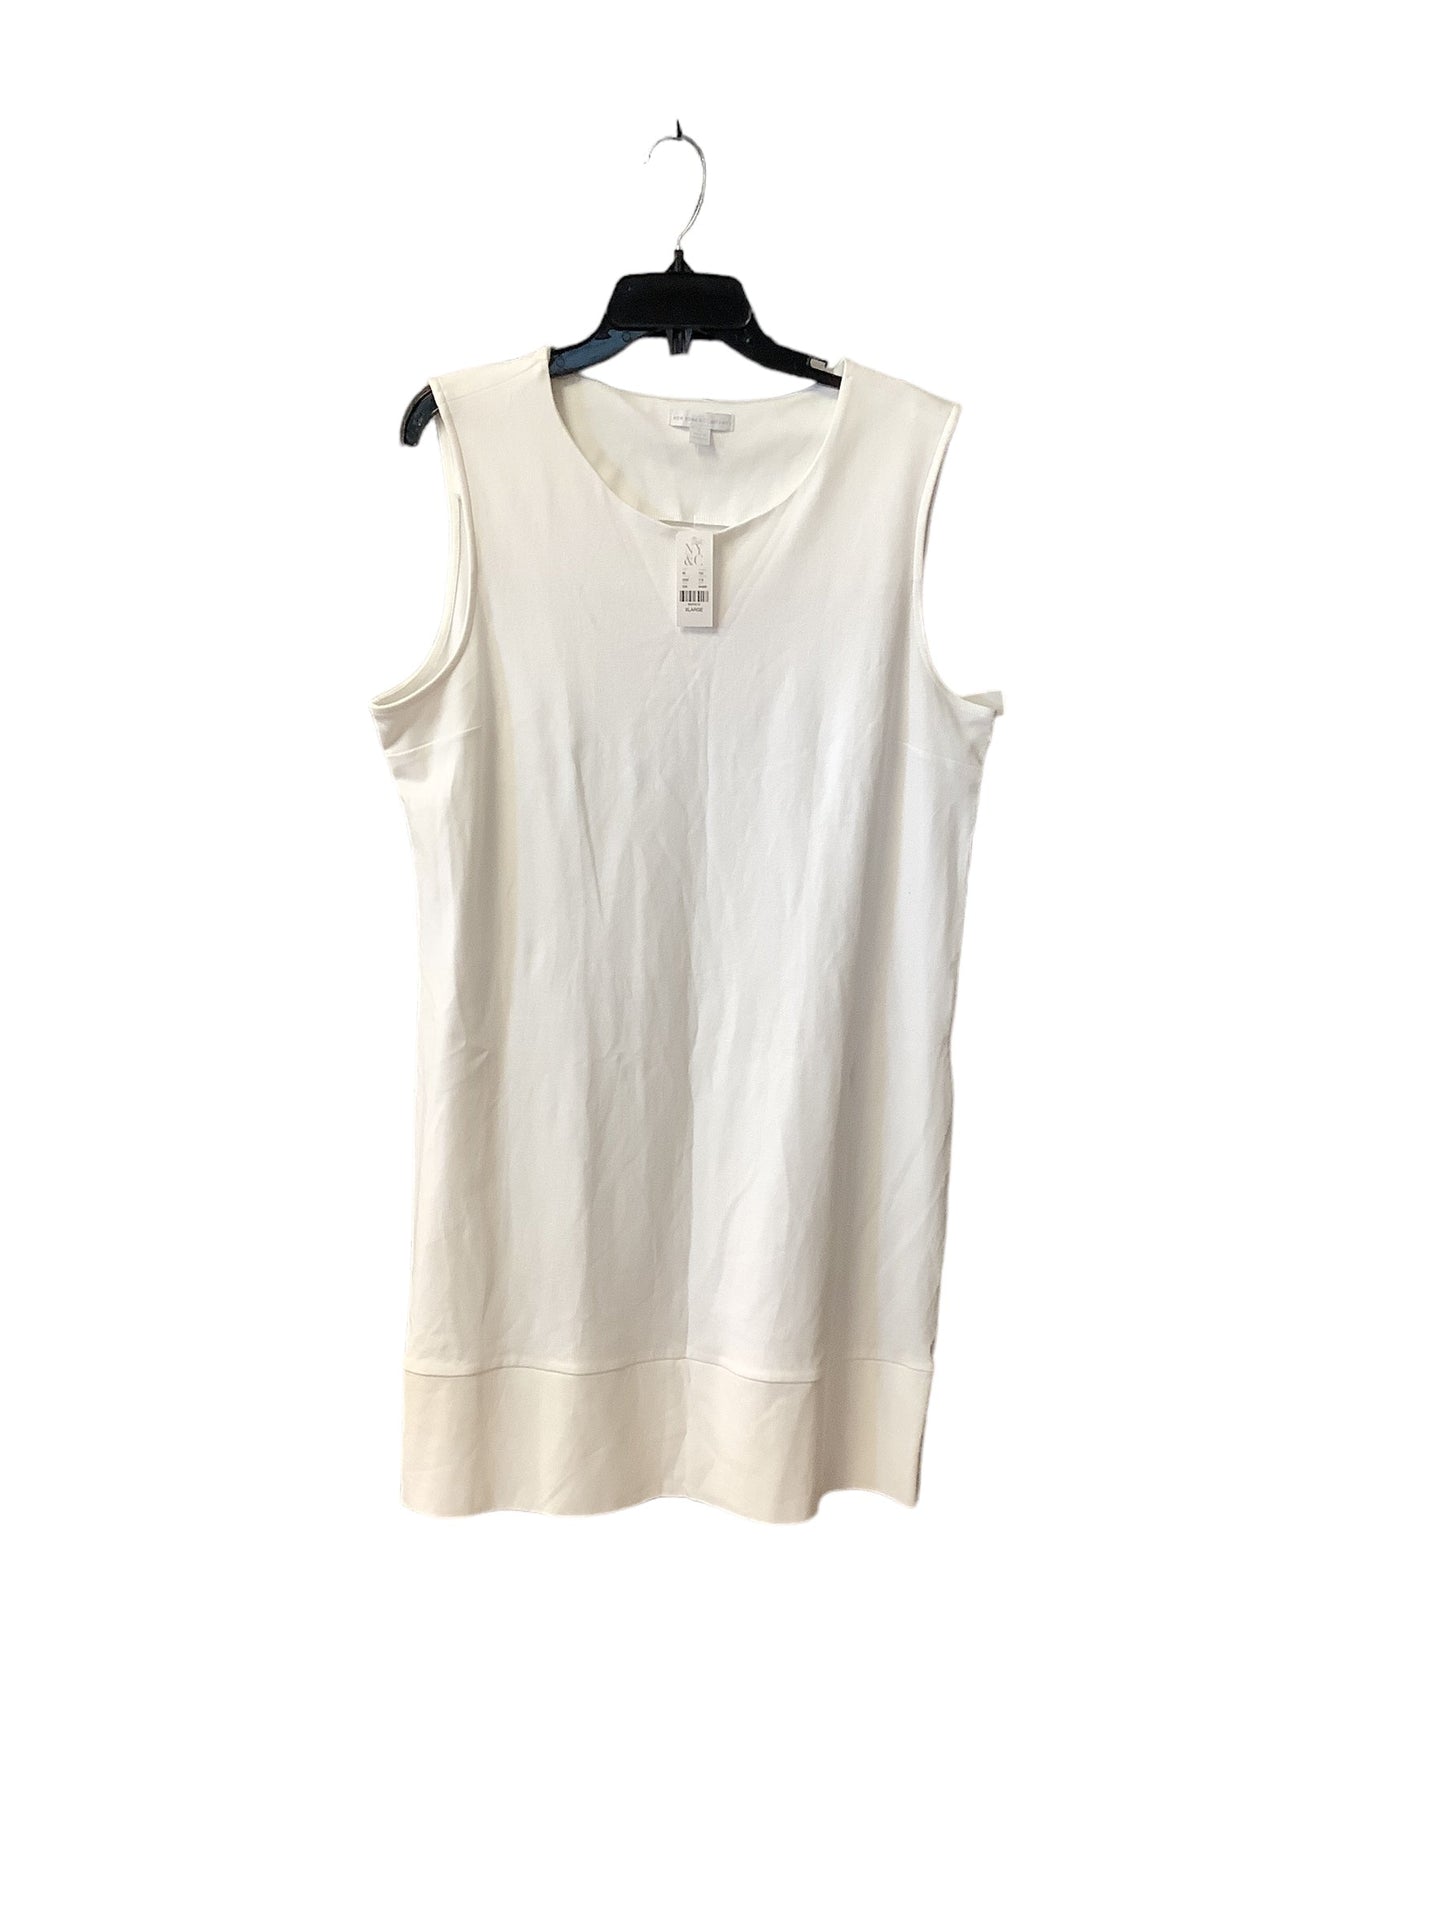 White Dress Casual Short New York And Co, Size Xl